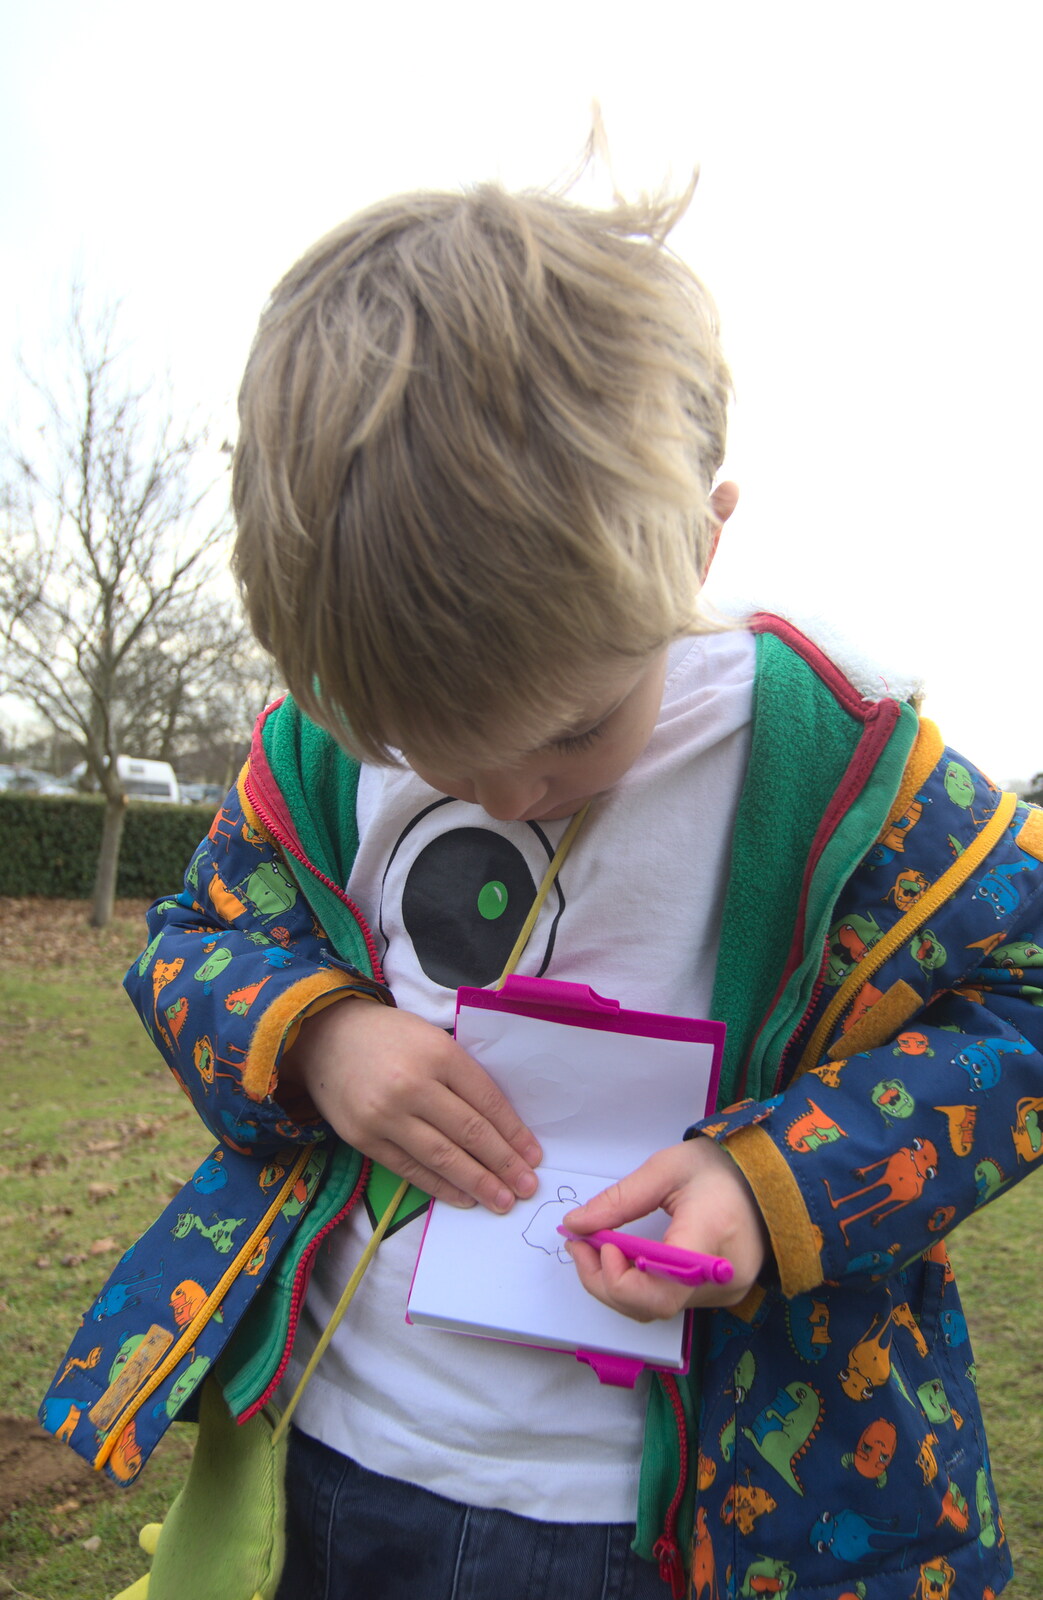 Harry draws something in his 'journal' from A Trip to Sutton Hoo, Woodbridge, Suffolk - 29th January 2017